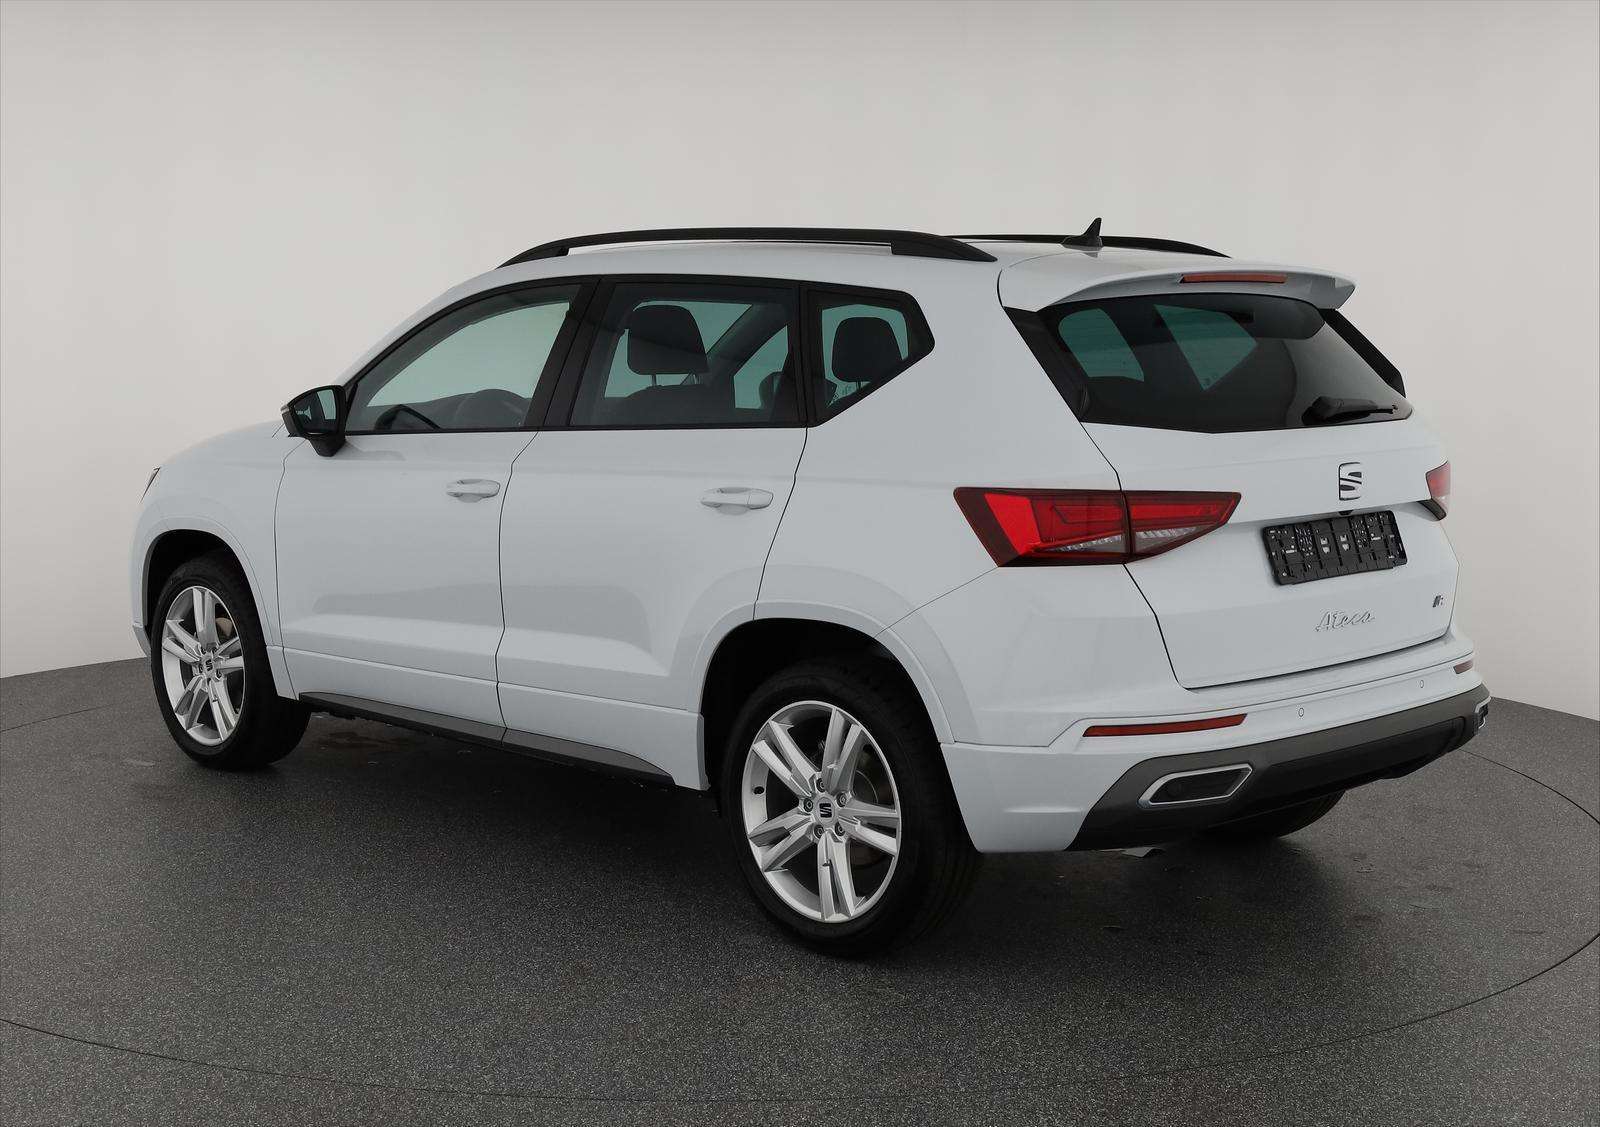 SEAT Ateca Off-Road/Pick-up in White new in Gundelsheim for € 35,295.-